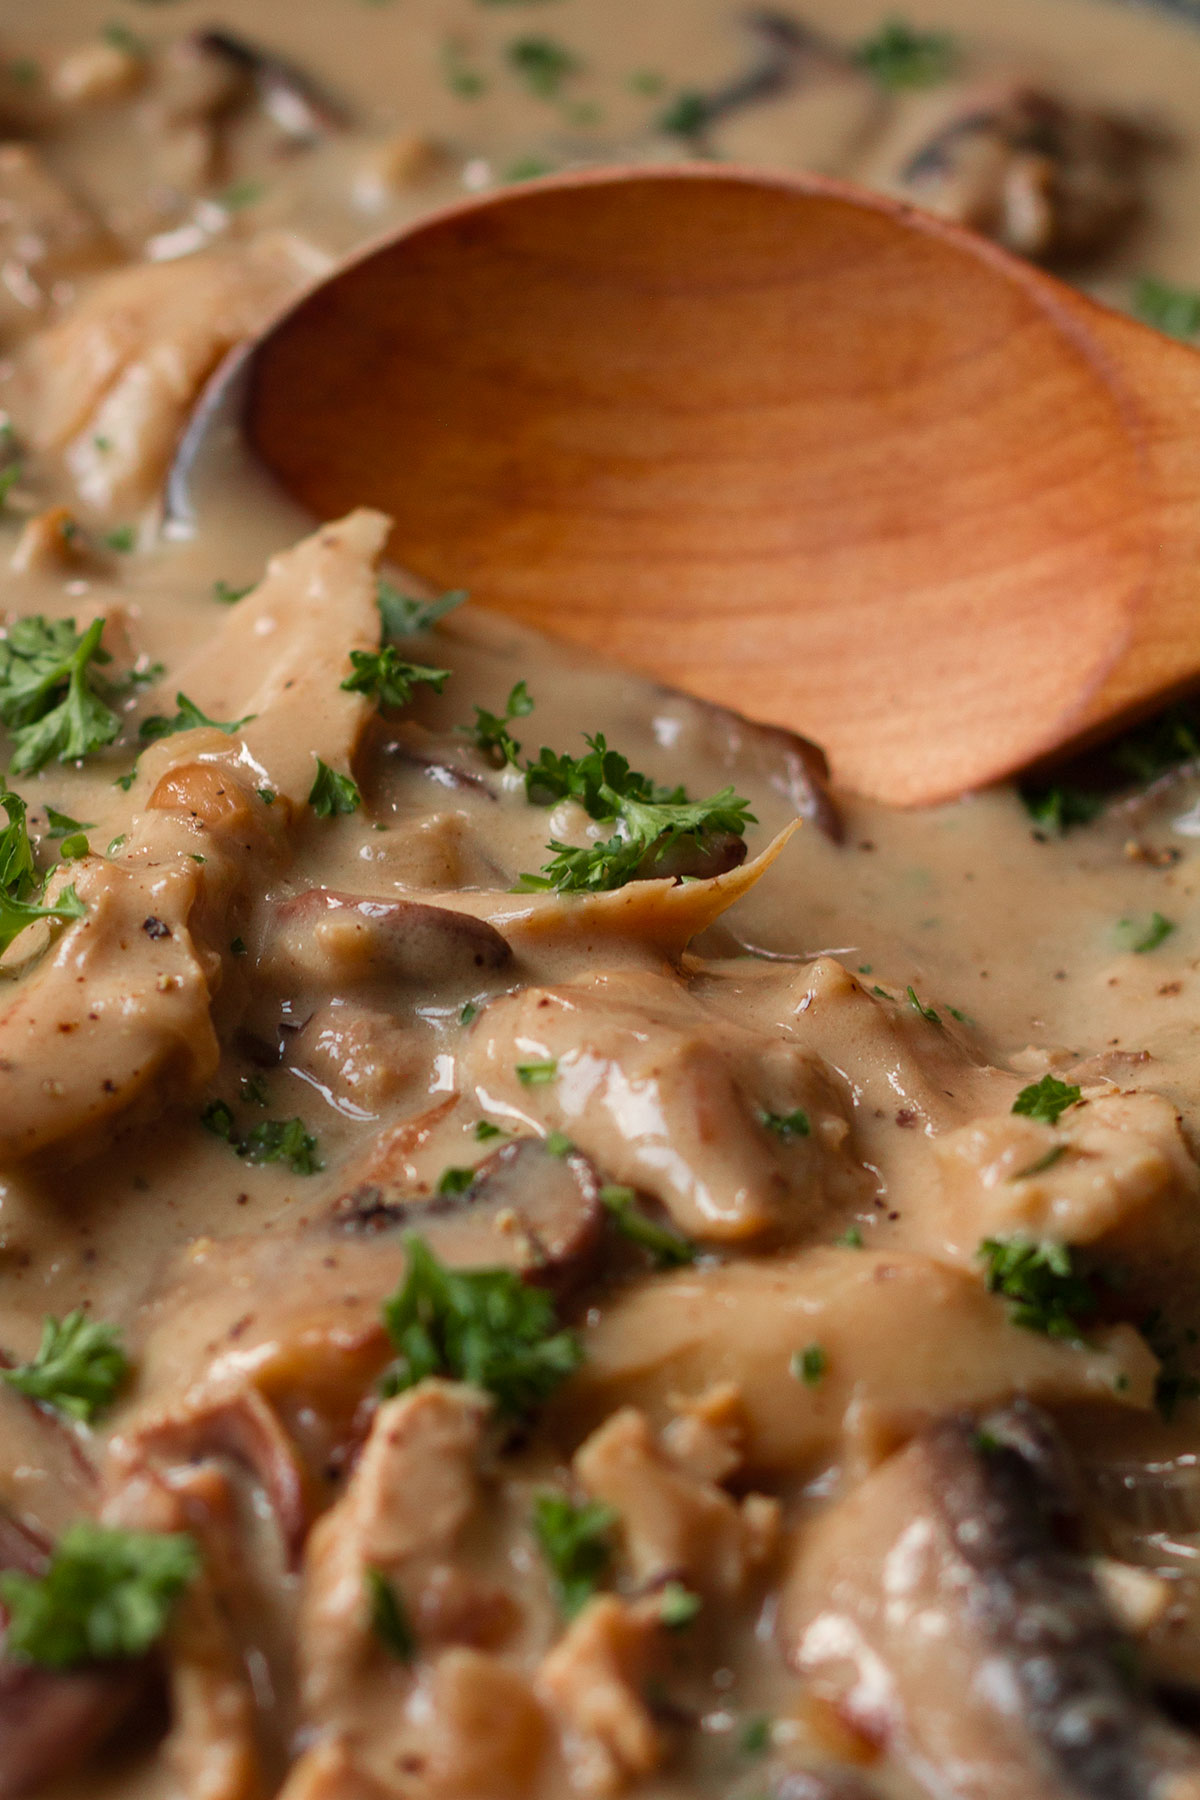 A close up photograph of turkey fricassee, garnished with parsley, being served with a wooden spoon.